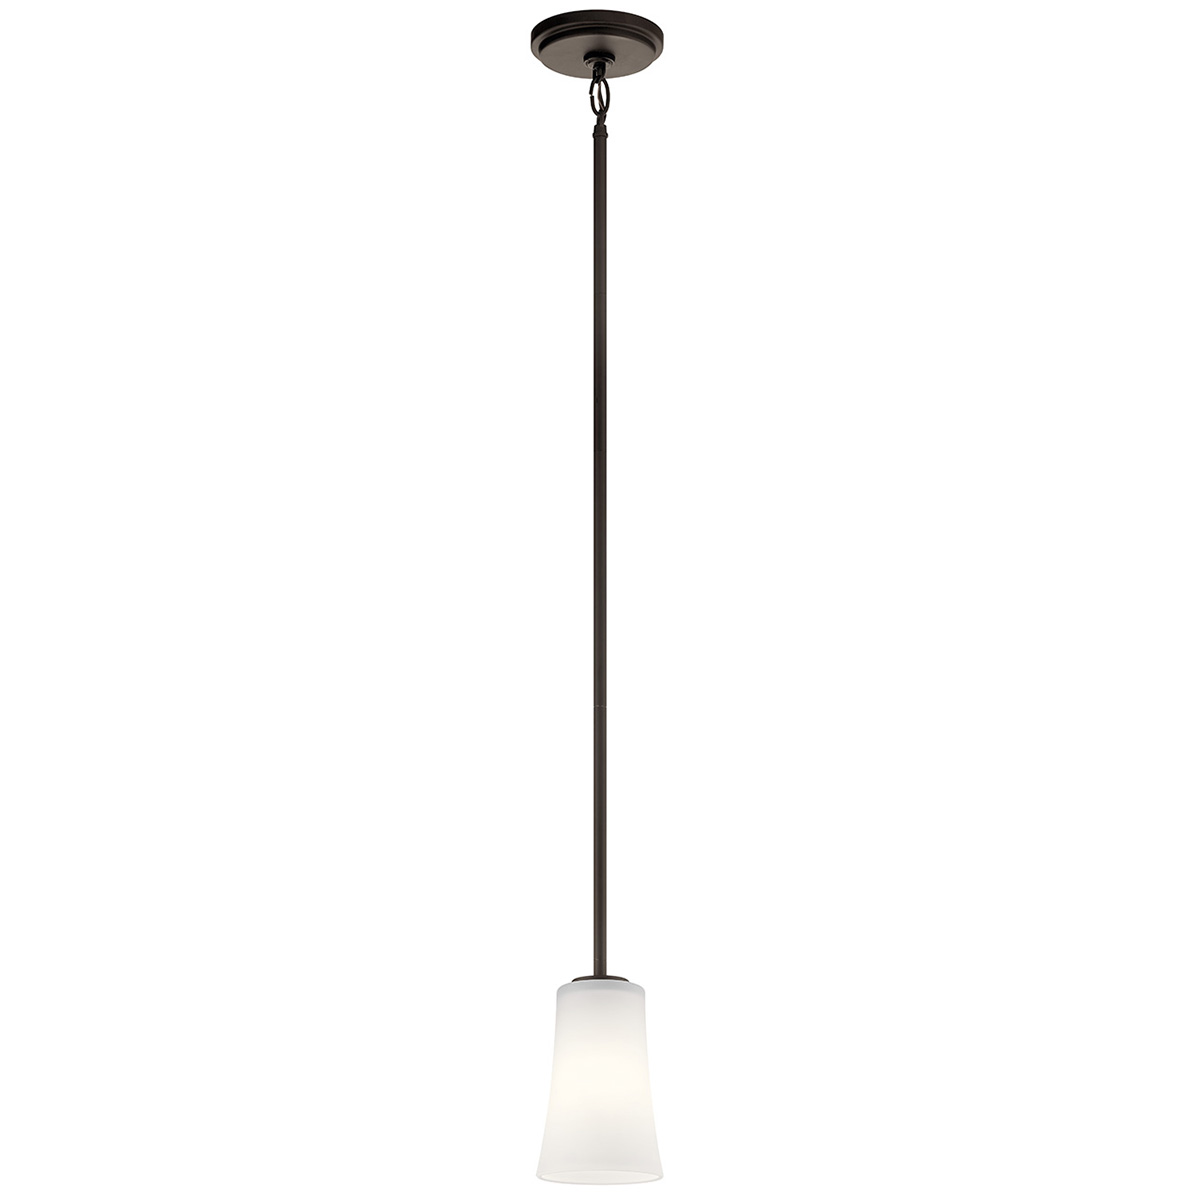 This 1 light mini pendant from the Armida(TM) collection is filled with contemporary touches, clean lines and simple structures. The unique silhouette brings height and dimension to the Olde Bronze finish.